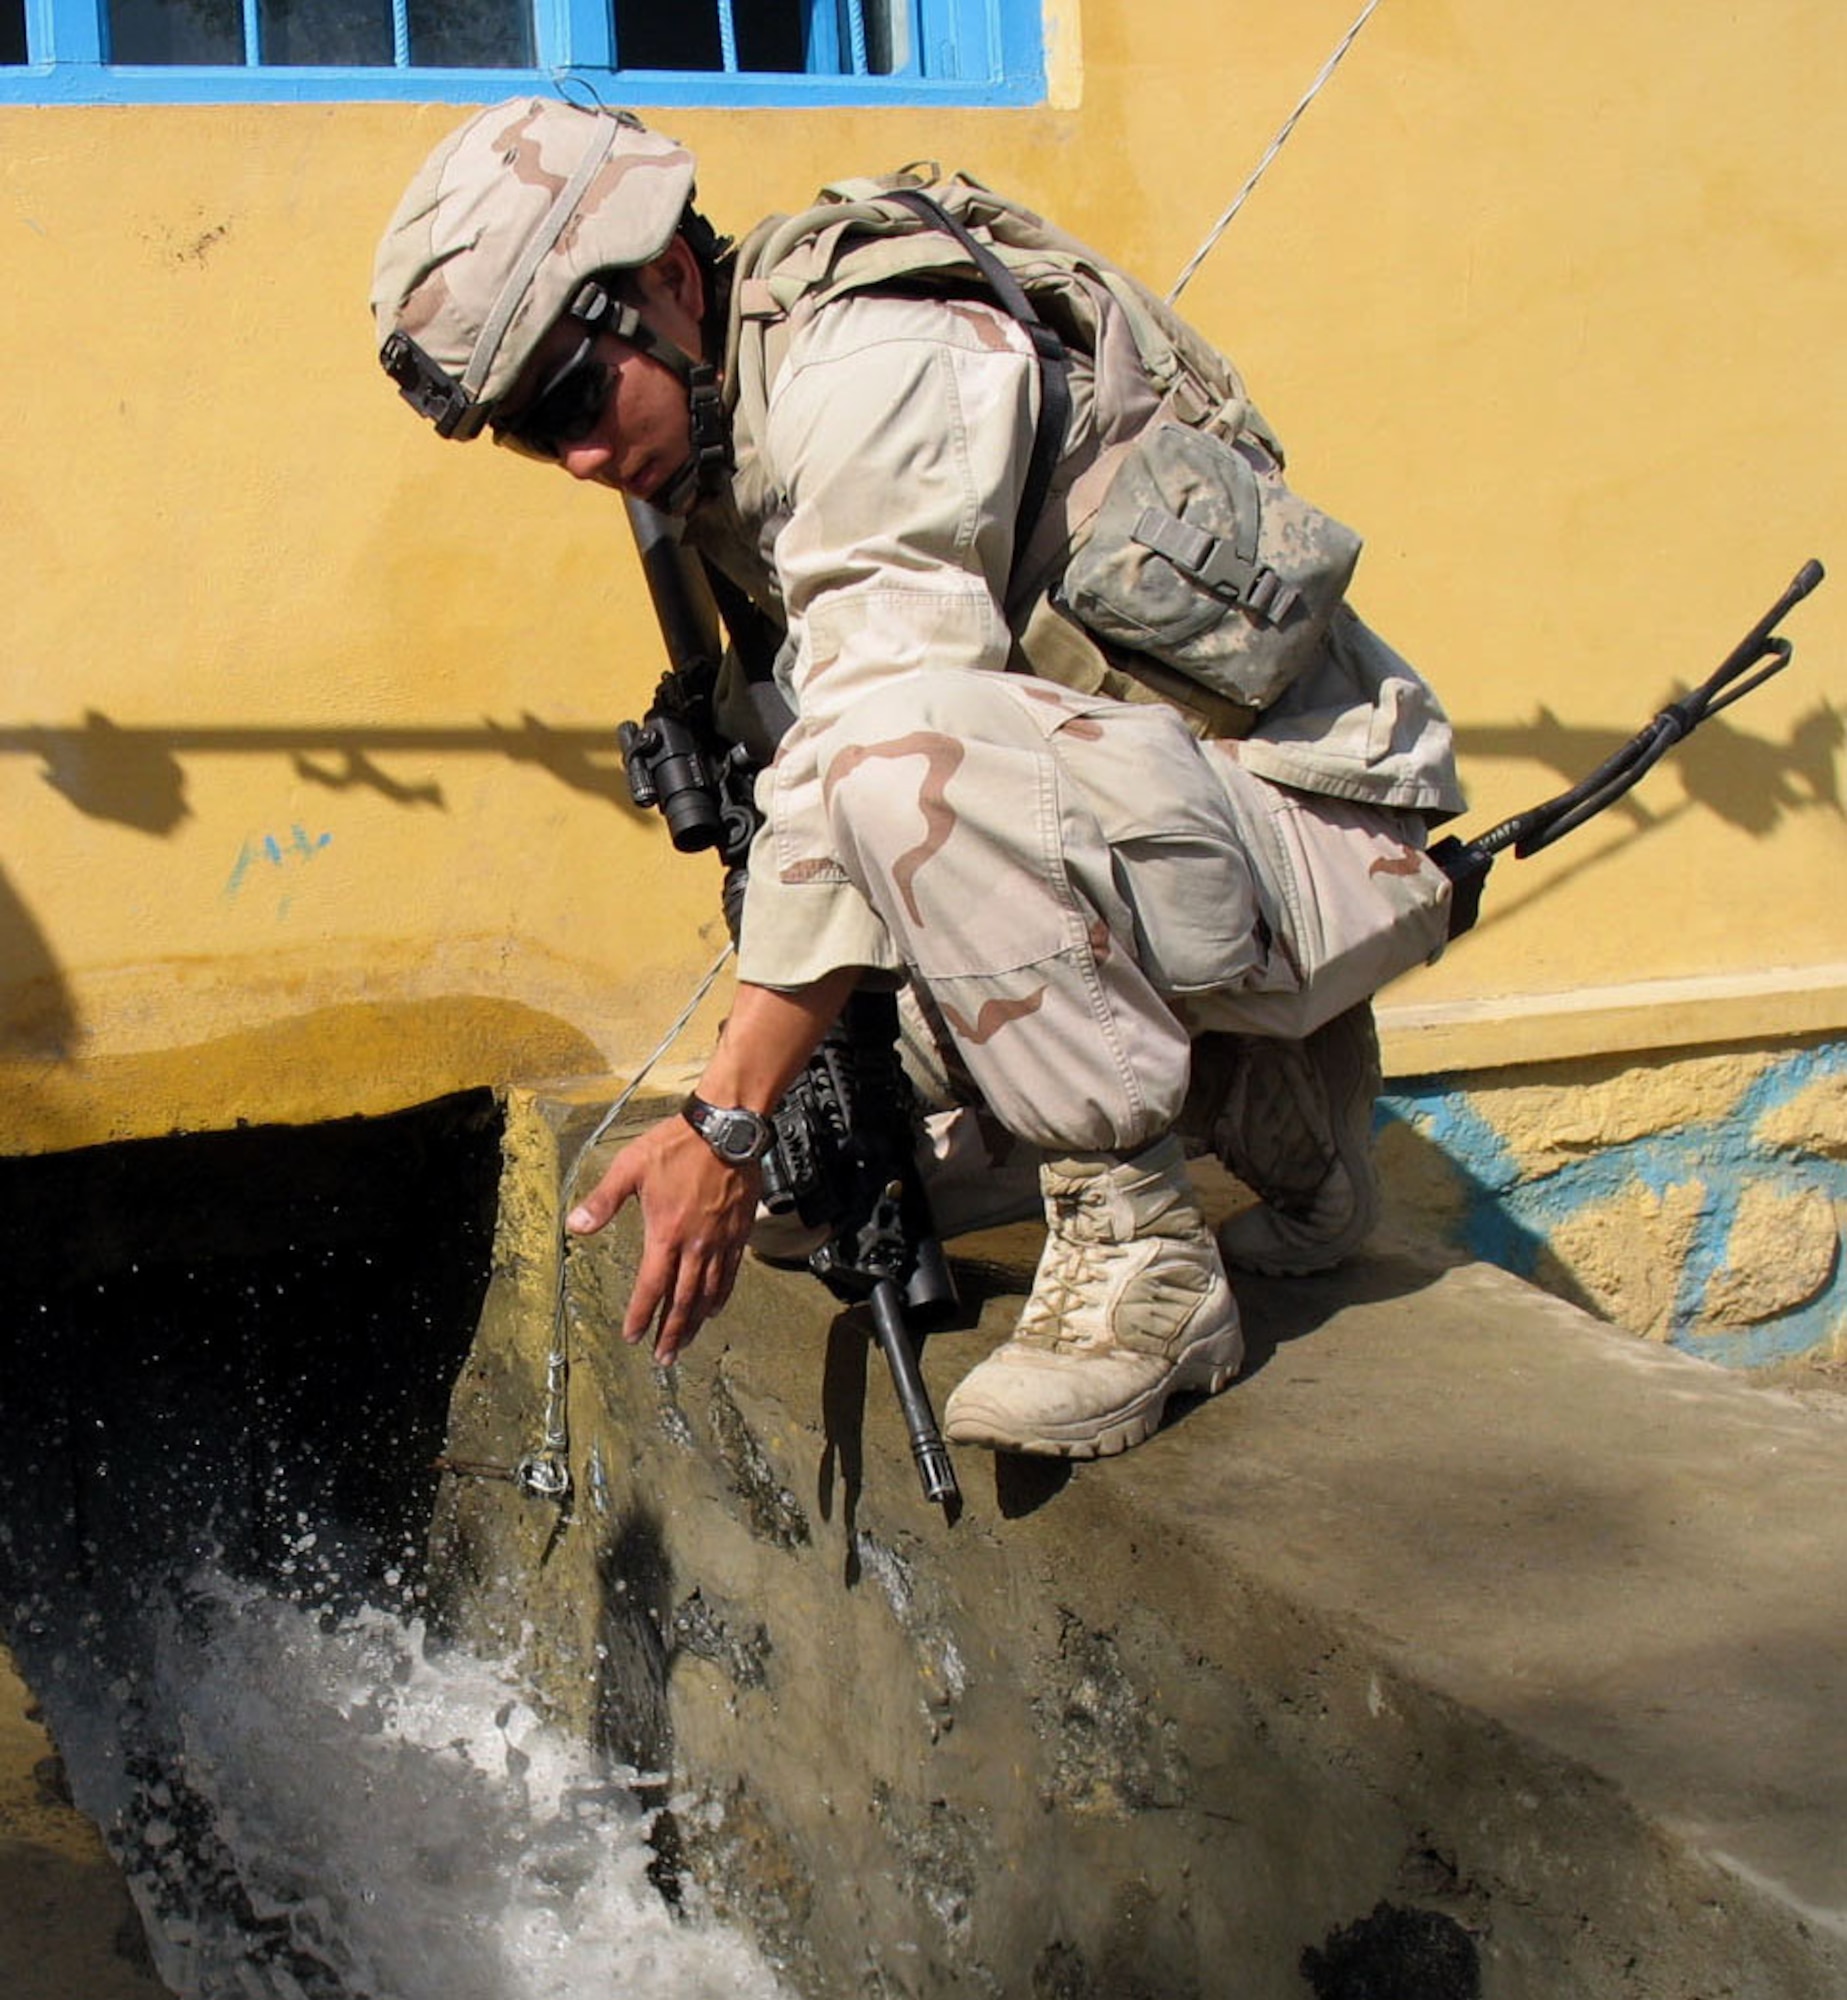 MEHTAR LAM, Afghanistan -- An Airman observes water as it flows through the newly opened micro-hydroelectric power plant built by the provincial reconstruction team here. The new plant is capable of providing electricity to 300 homes in the area. (Air Force photo\Capt. Gerardo Gonzalez)  